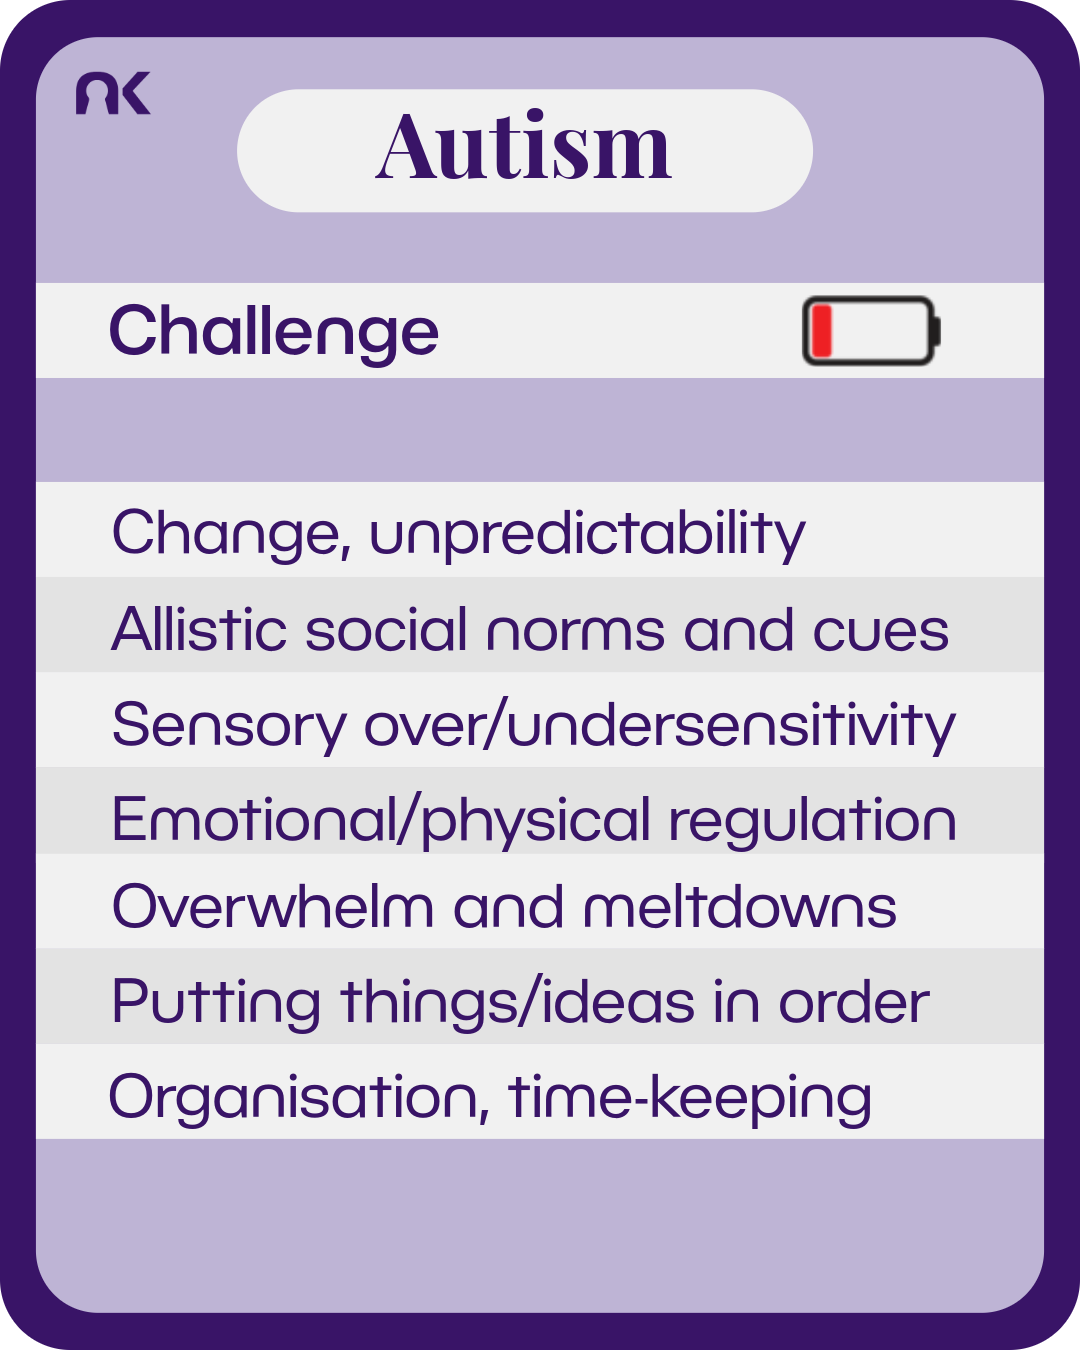 An information card made to look like it is from a card game. Next to the subtitle "challenge" is a battery with red bar to show low charge. Text says: "Autism. Challenge. Change, unpredictability; Allistic social norms and cues; Sensory over/undersensitivity; Emotional/physical regulation; Overwhelm and meltdowns; Putting things/ideas in order; Organisation, time-keeping."